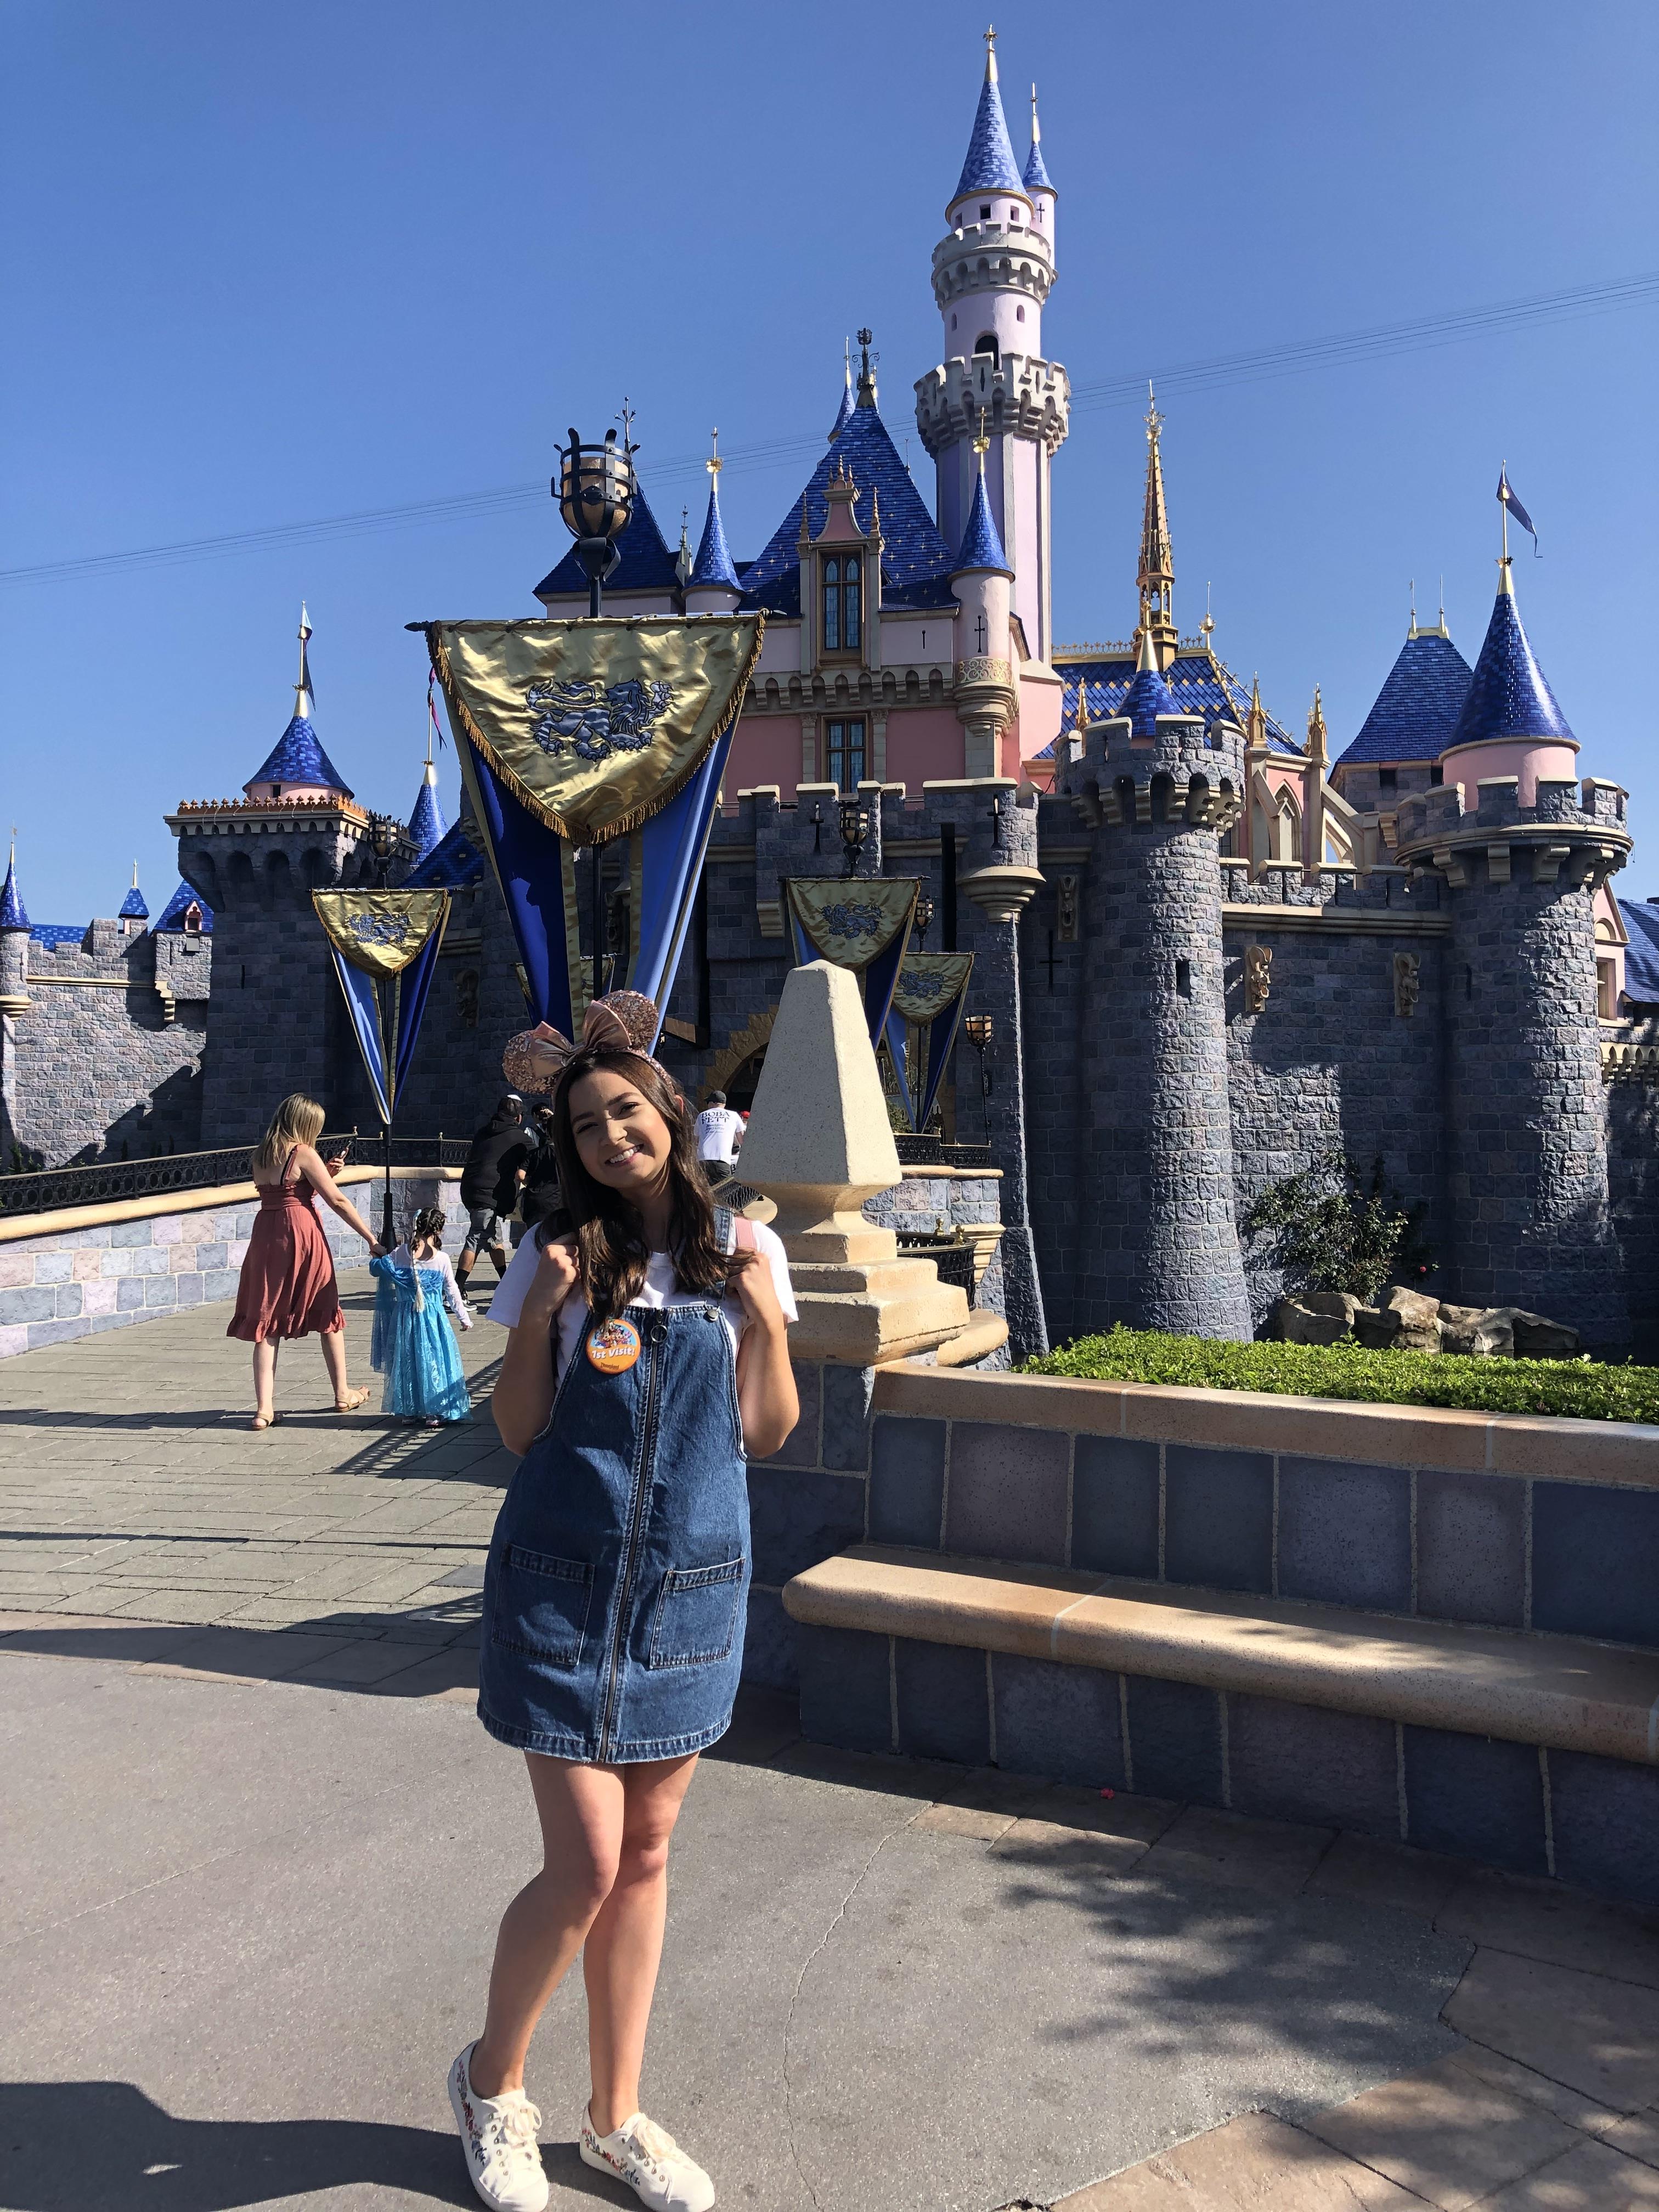 A young woman (the author, Cami) wearing overalls dress and pink Mickey Mouse ears, poses in front of a castle at Disneyland.